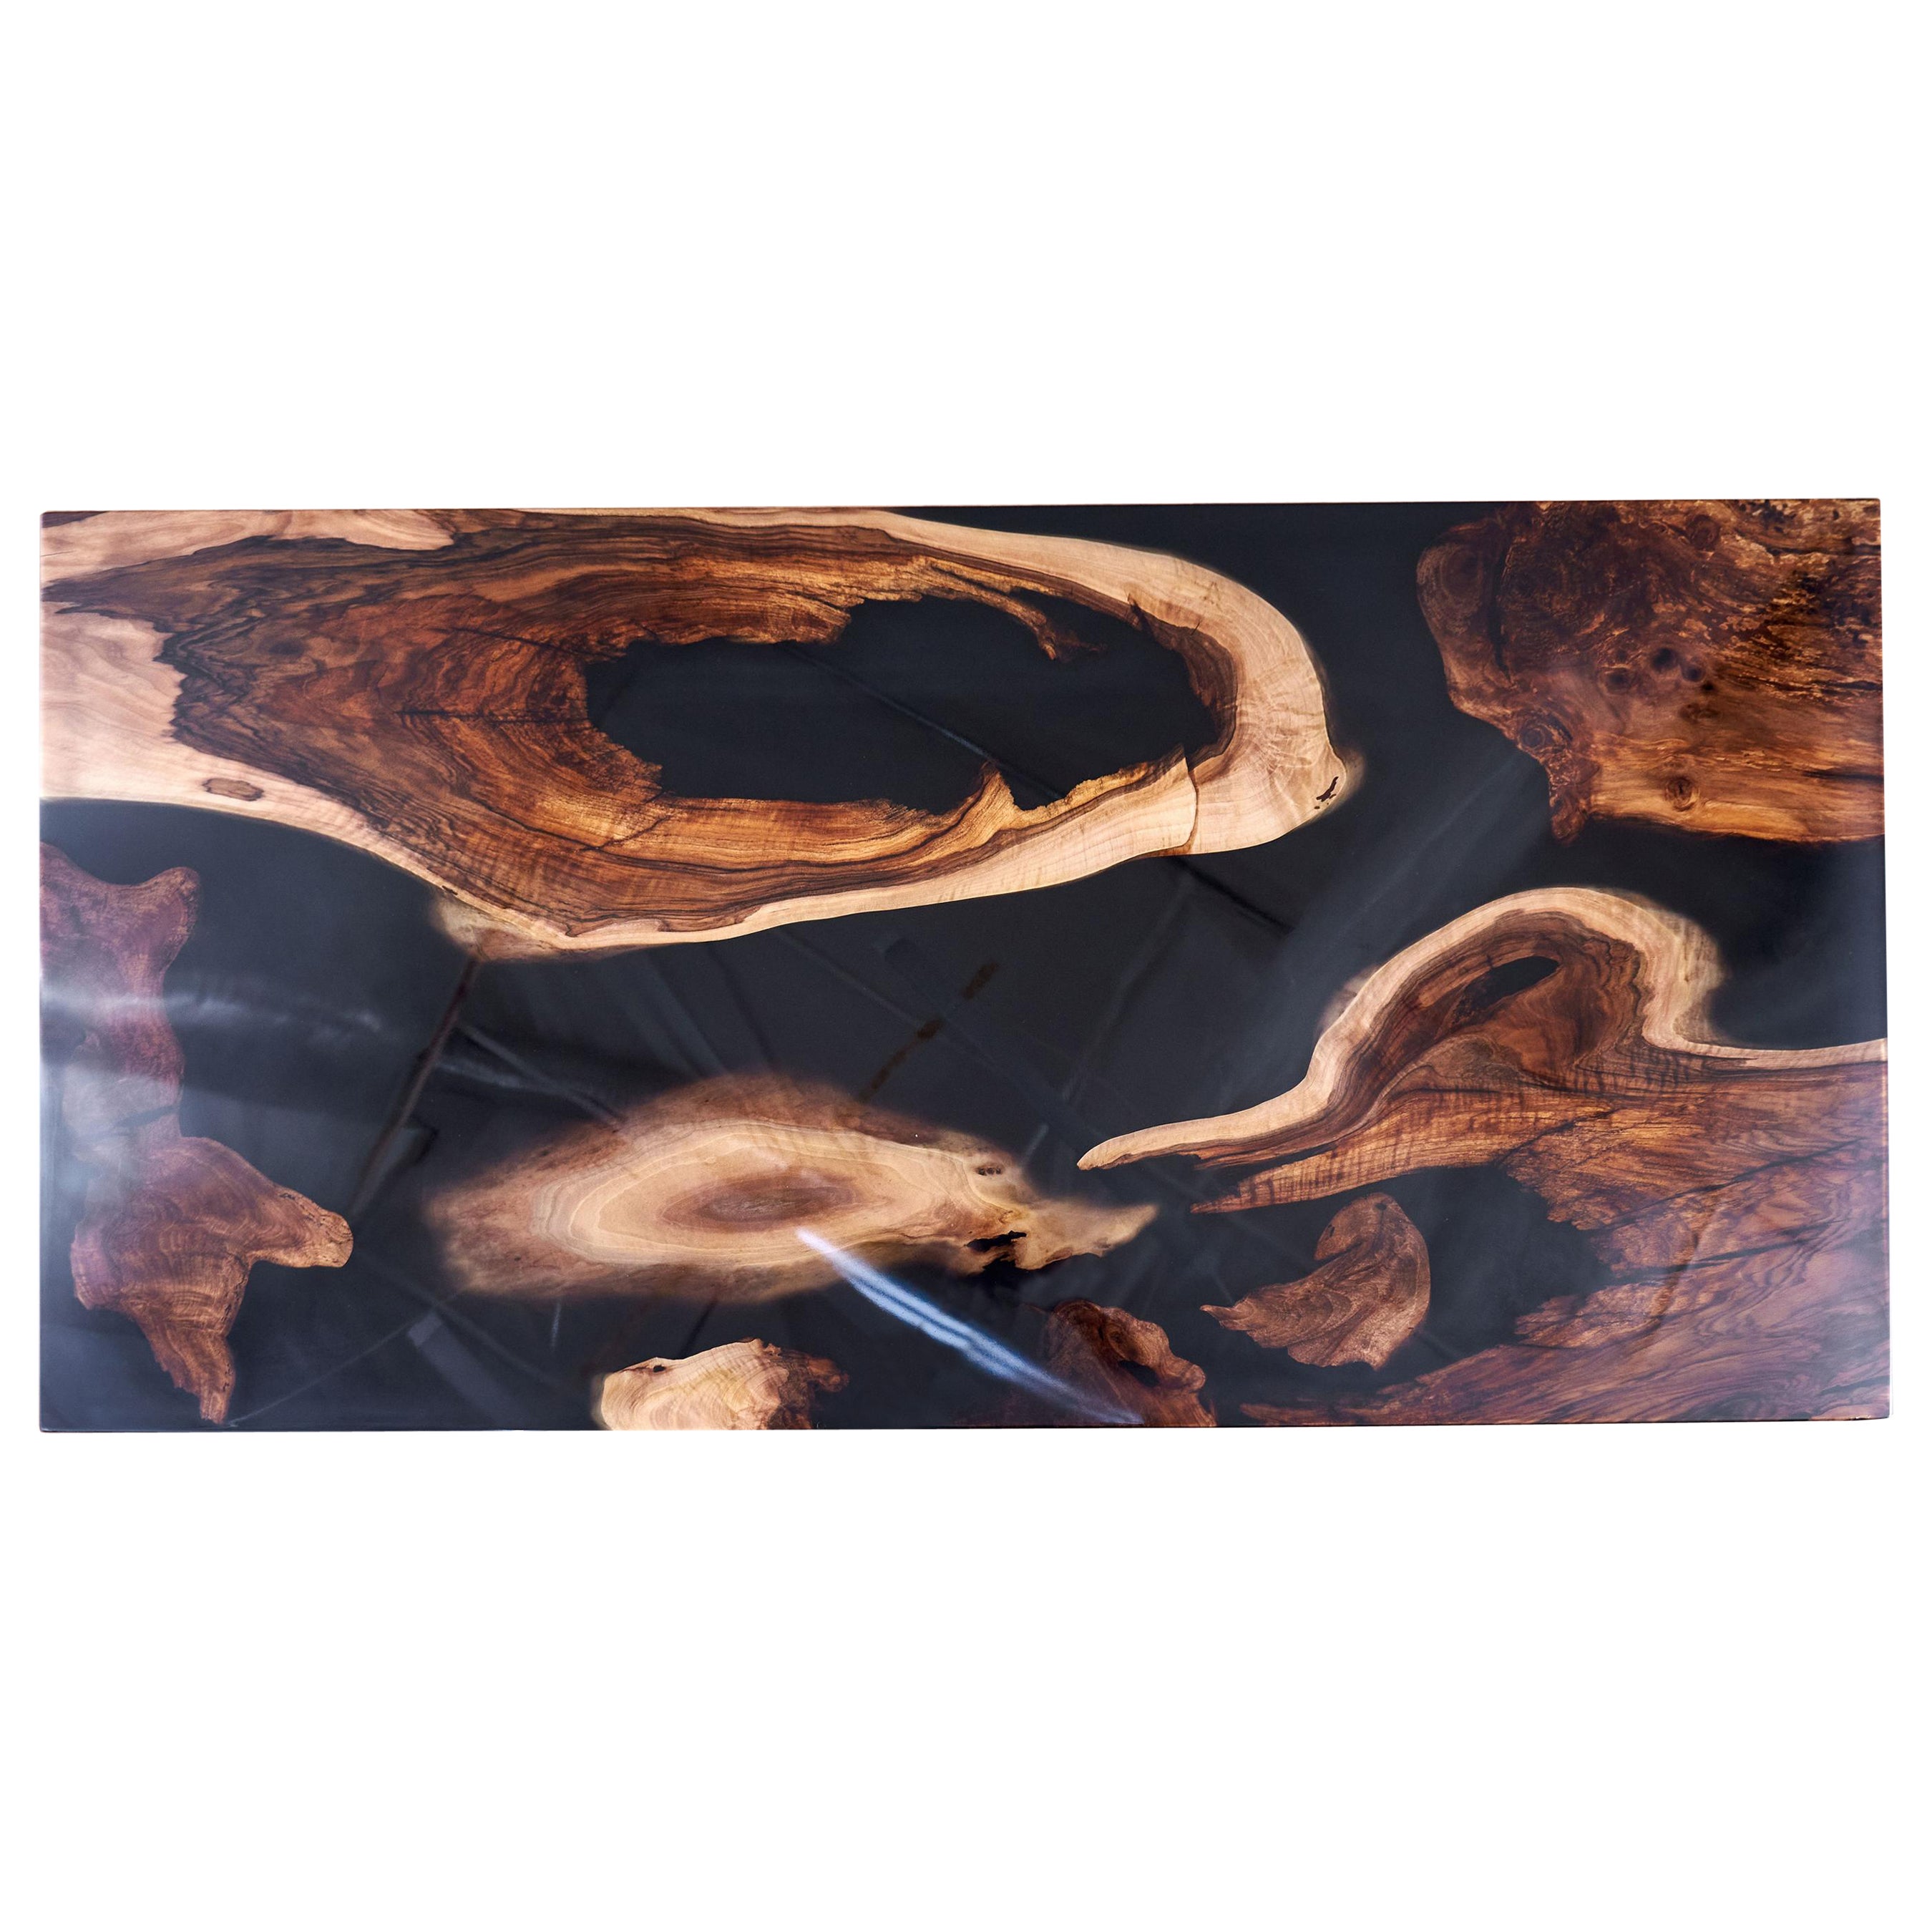 Battle of the Universes
Gorgeous old walnut roots. Authentic texture and character of the walnut vein. Hand leveled, cleaned and filled with a black opaque resin that blends perfectly with the nut roots. Extra layer of epoxy on top for permanent